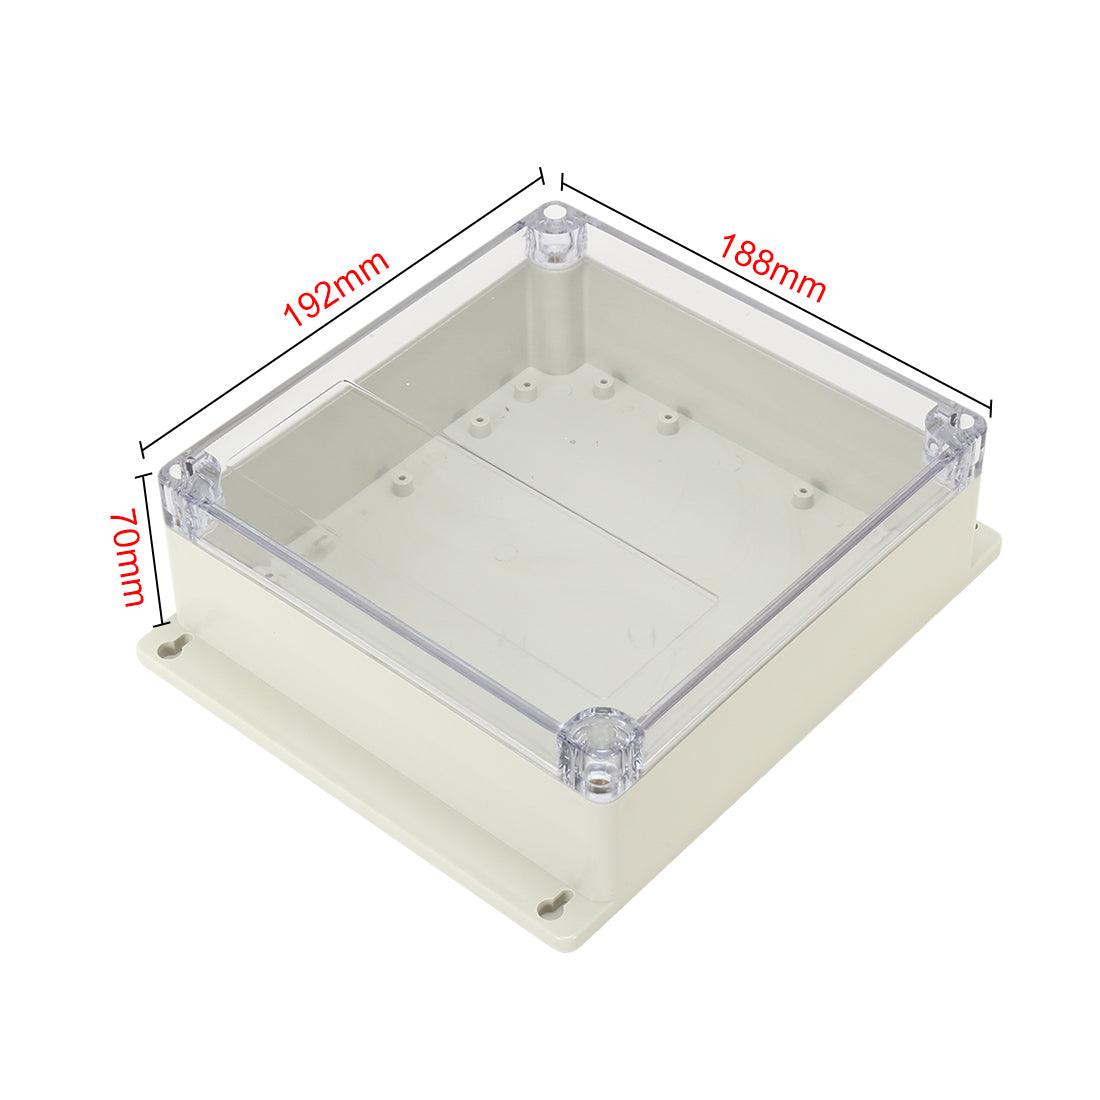 uxcell Uxcell 7.6"x7.4"x2.8"(192mmx188mmx70mm) ABS Junction Box Universal Project Enclosure w PC Transparent Cover